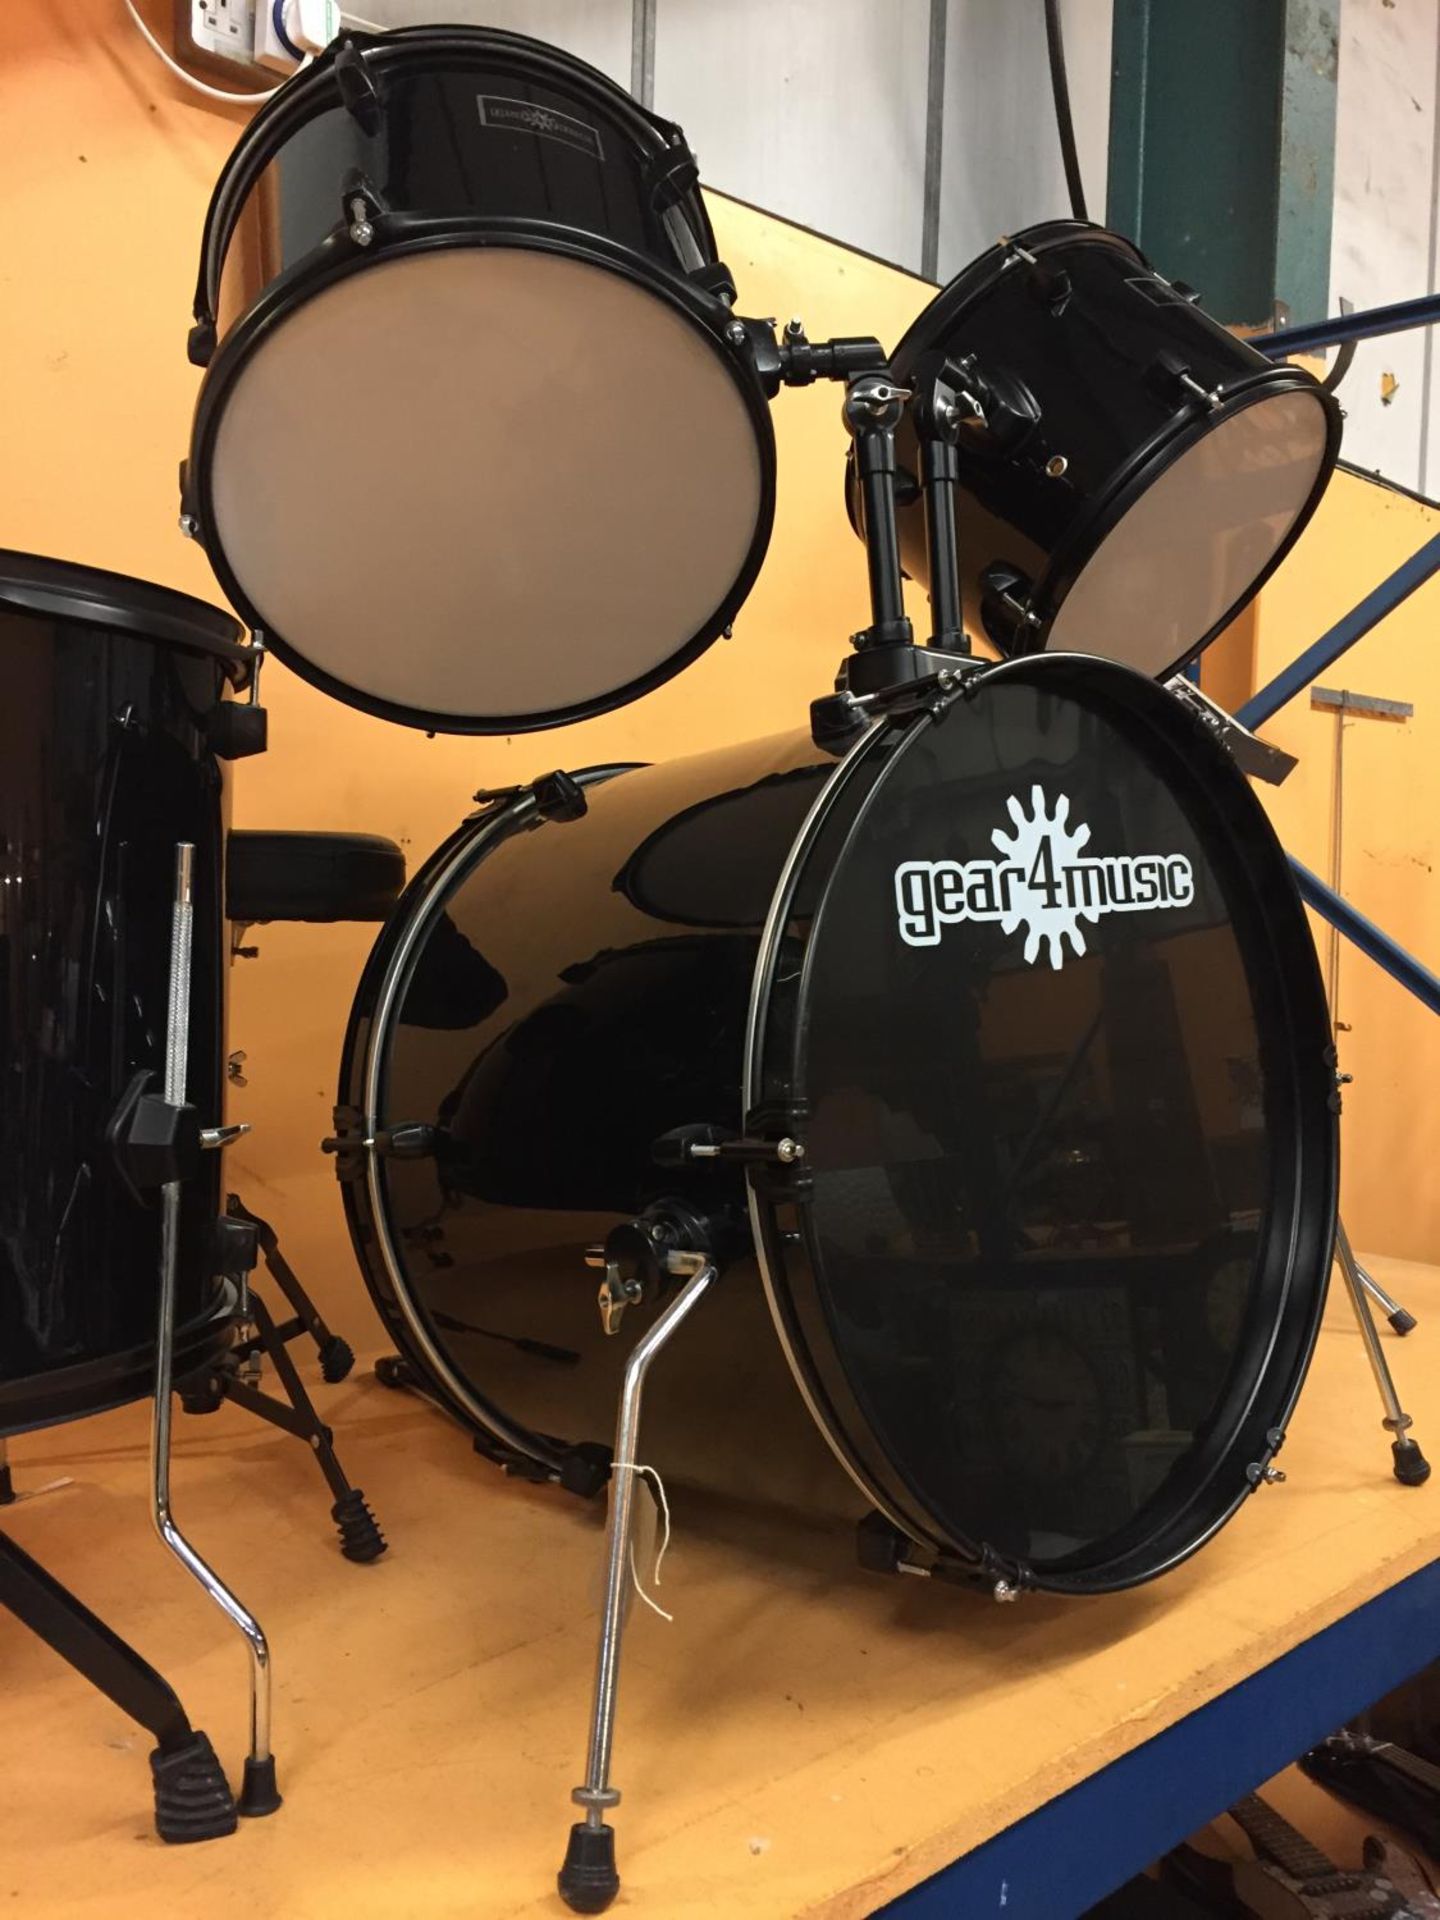 A BLACK GEAR FOR MUSIC DRUM KIT WITH MUSIC AND MUSIC STAND - Image 2 of 6